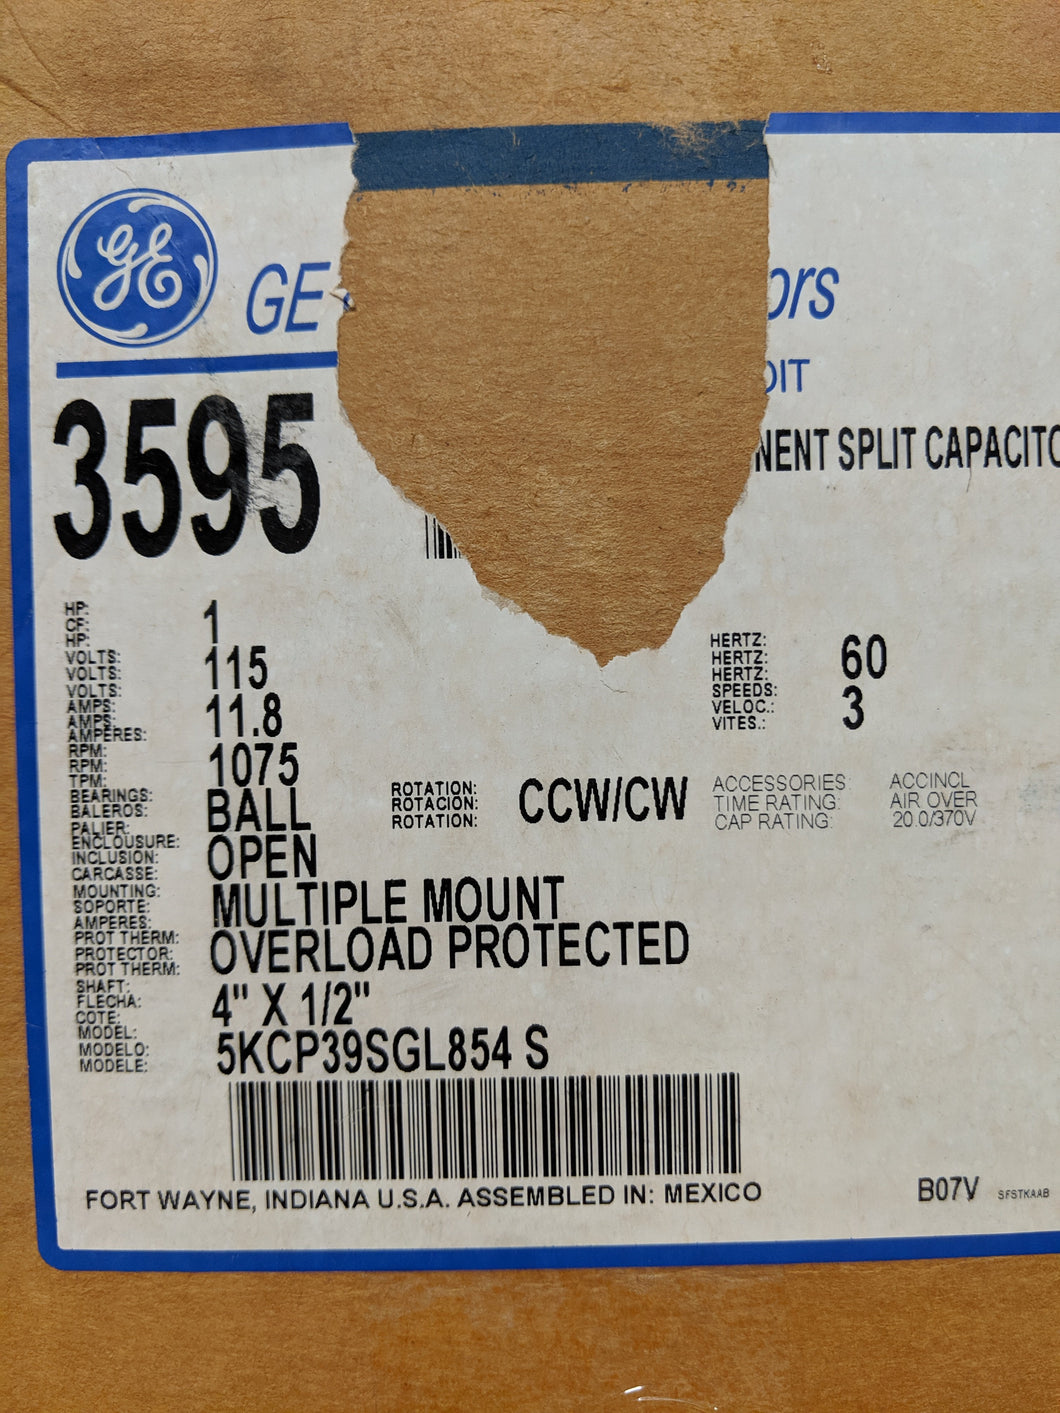 GE 3595, 1 HP, 115 Volts, 5KCP39SGL854S